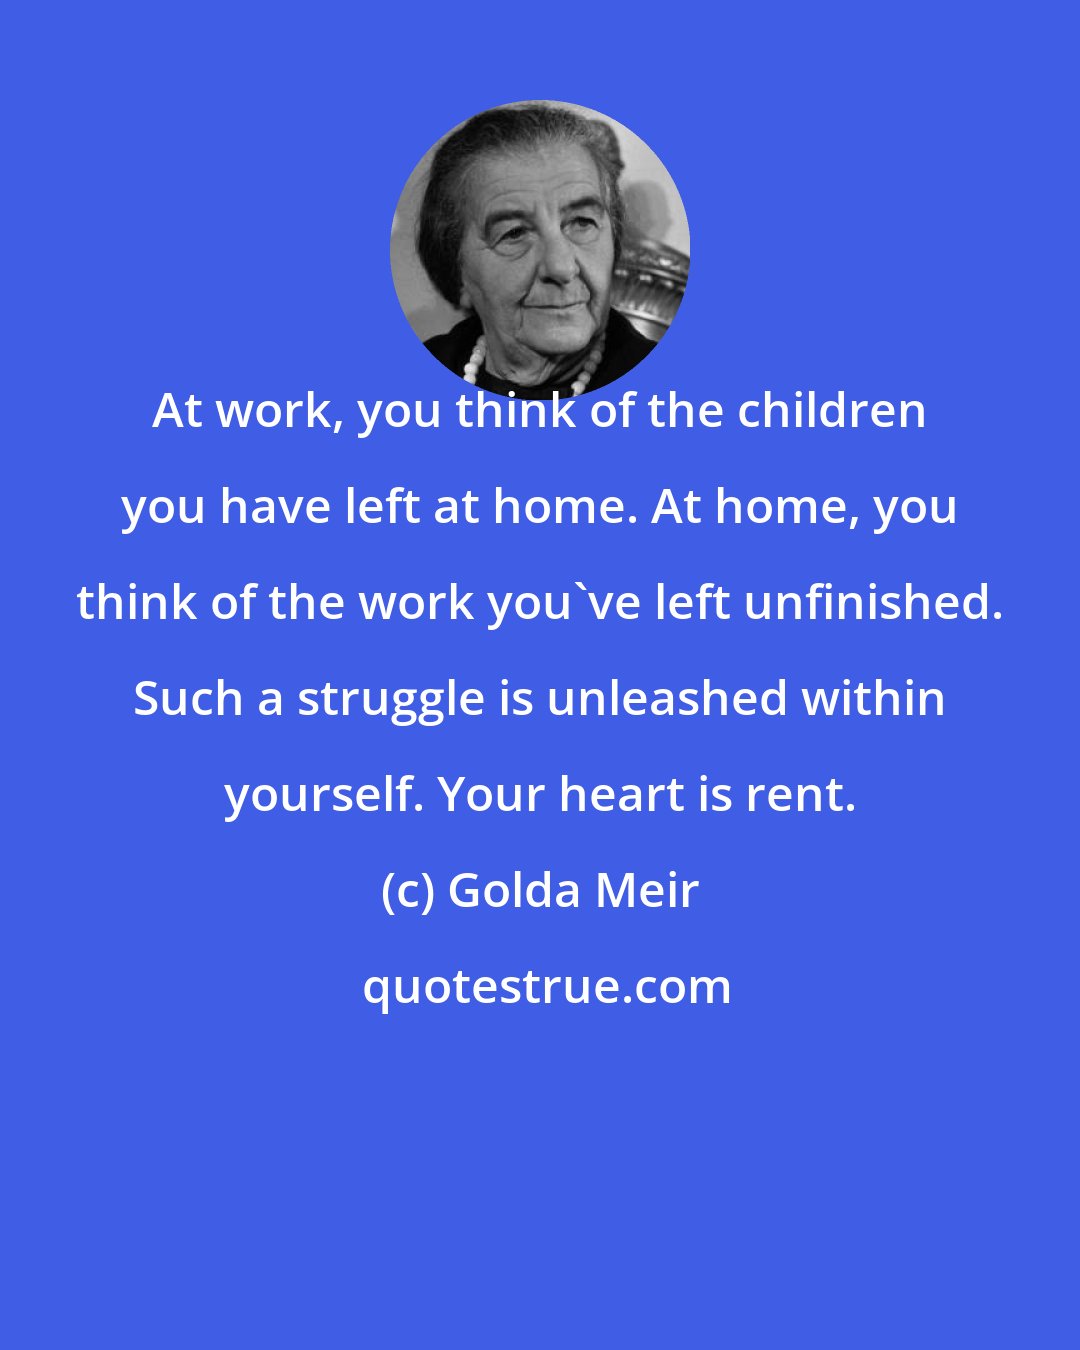 Golda Meir: At work, you think of the children you have left at home. At home, you think of the work you've left unfinished. Such a struggle is unleashed within yourself. Your heart is rent.